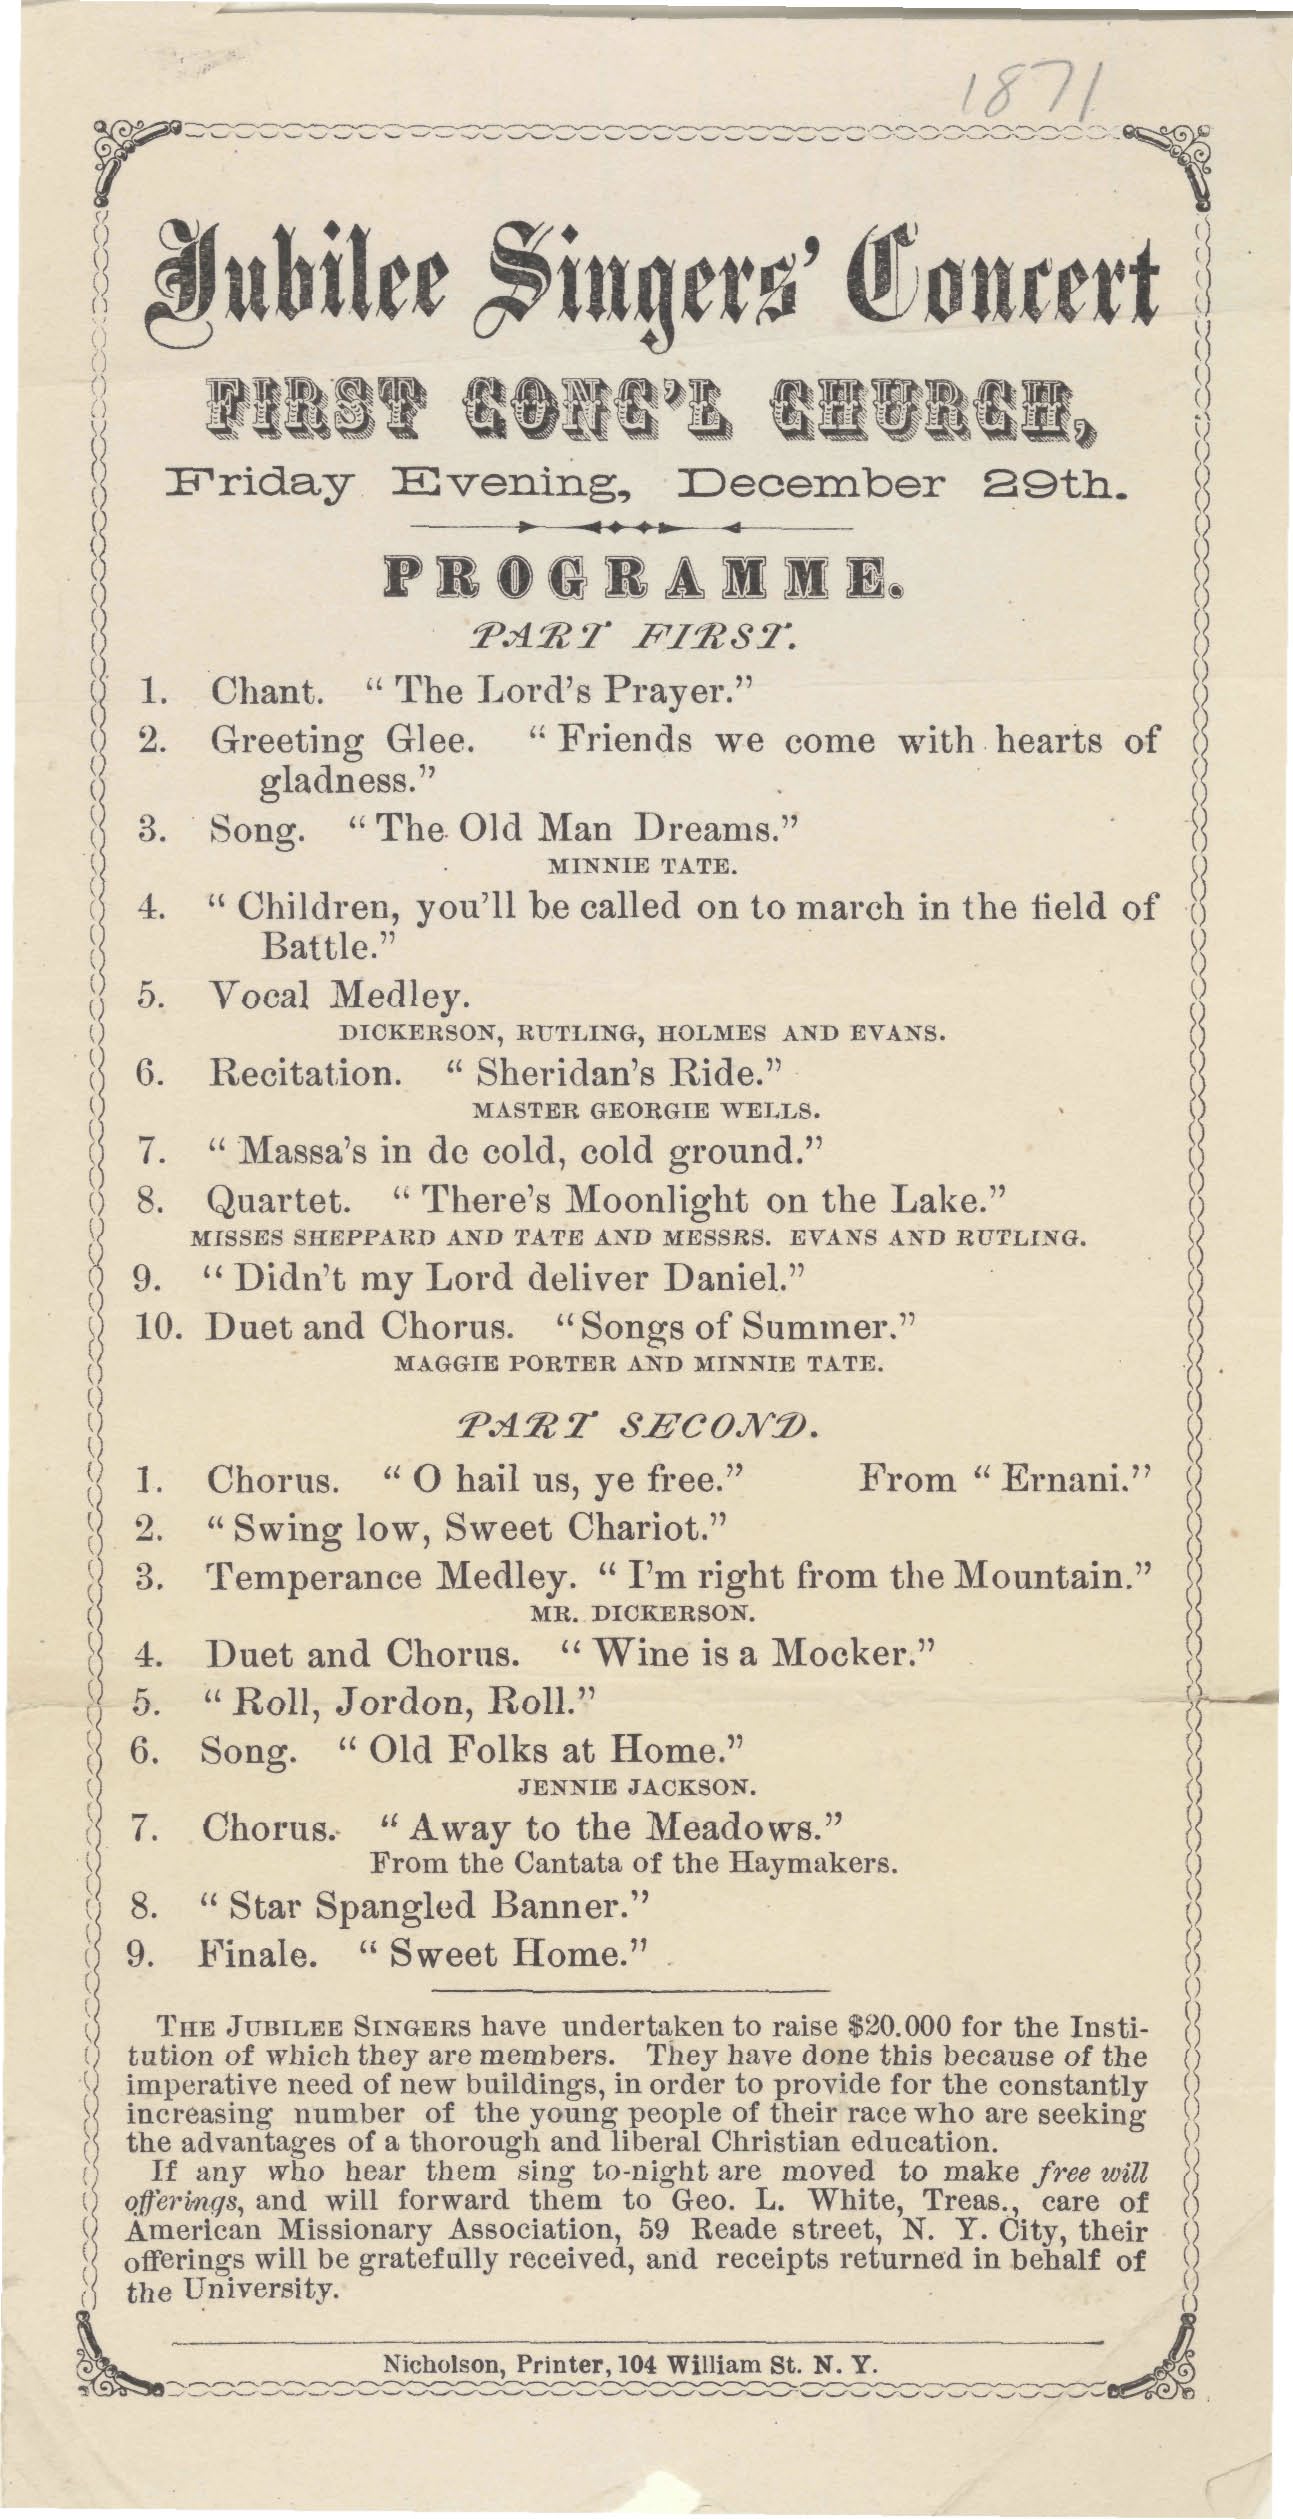 Jubilee_Singers_concert_First_Congl_Church_...__1871 (1).pdfmerican, Broadsides and Ephemera, 1871